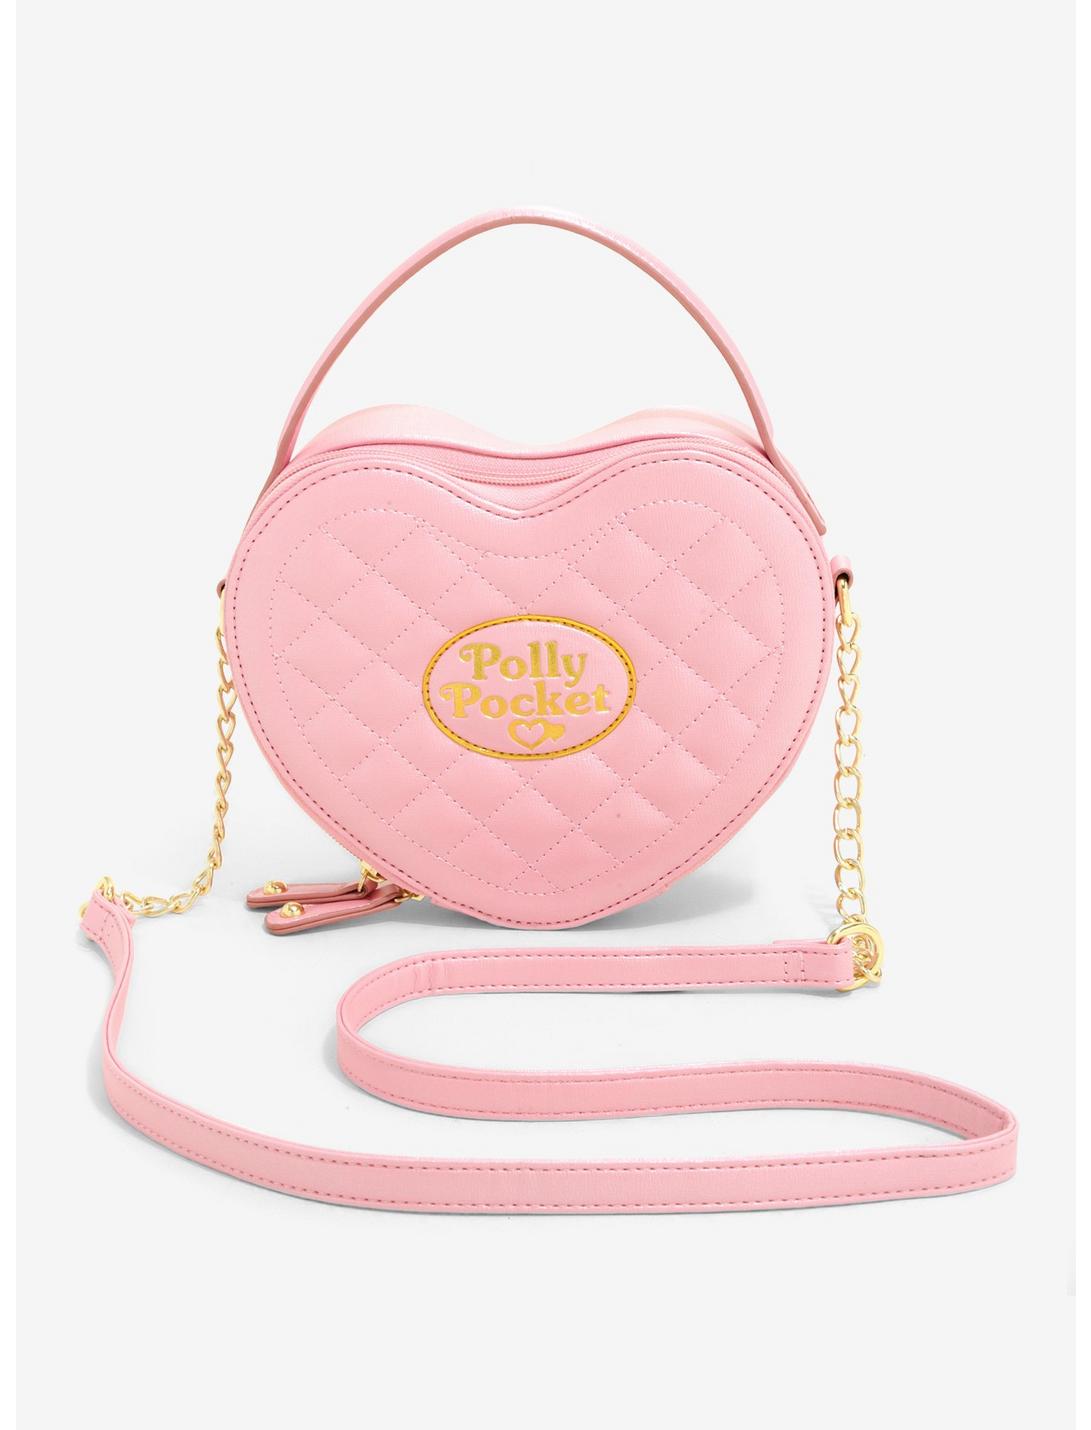 Polly Pocket Pink Quilted Wallet 